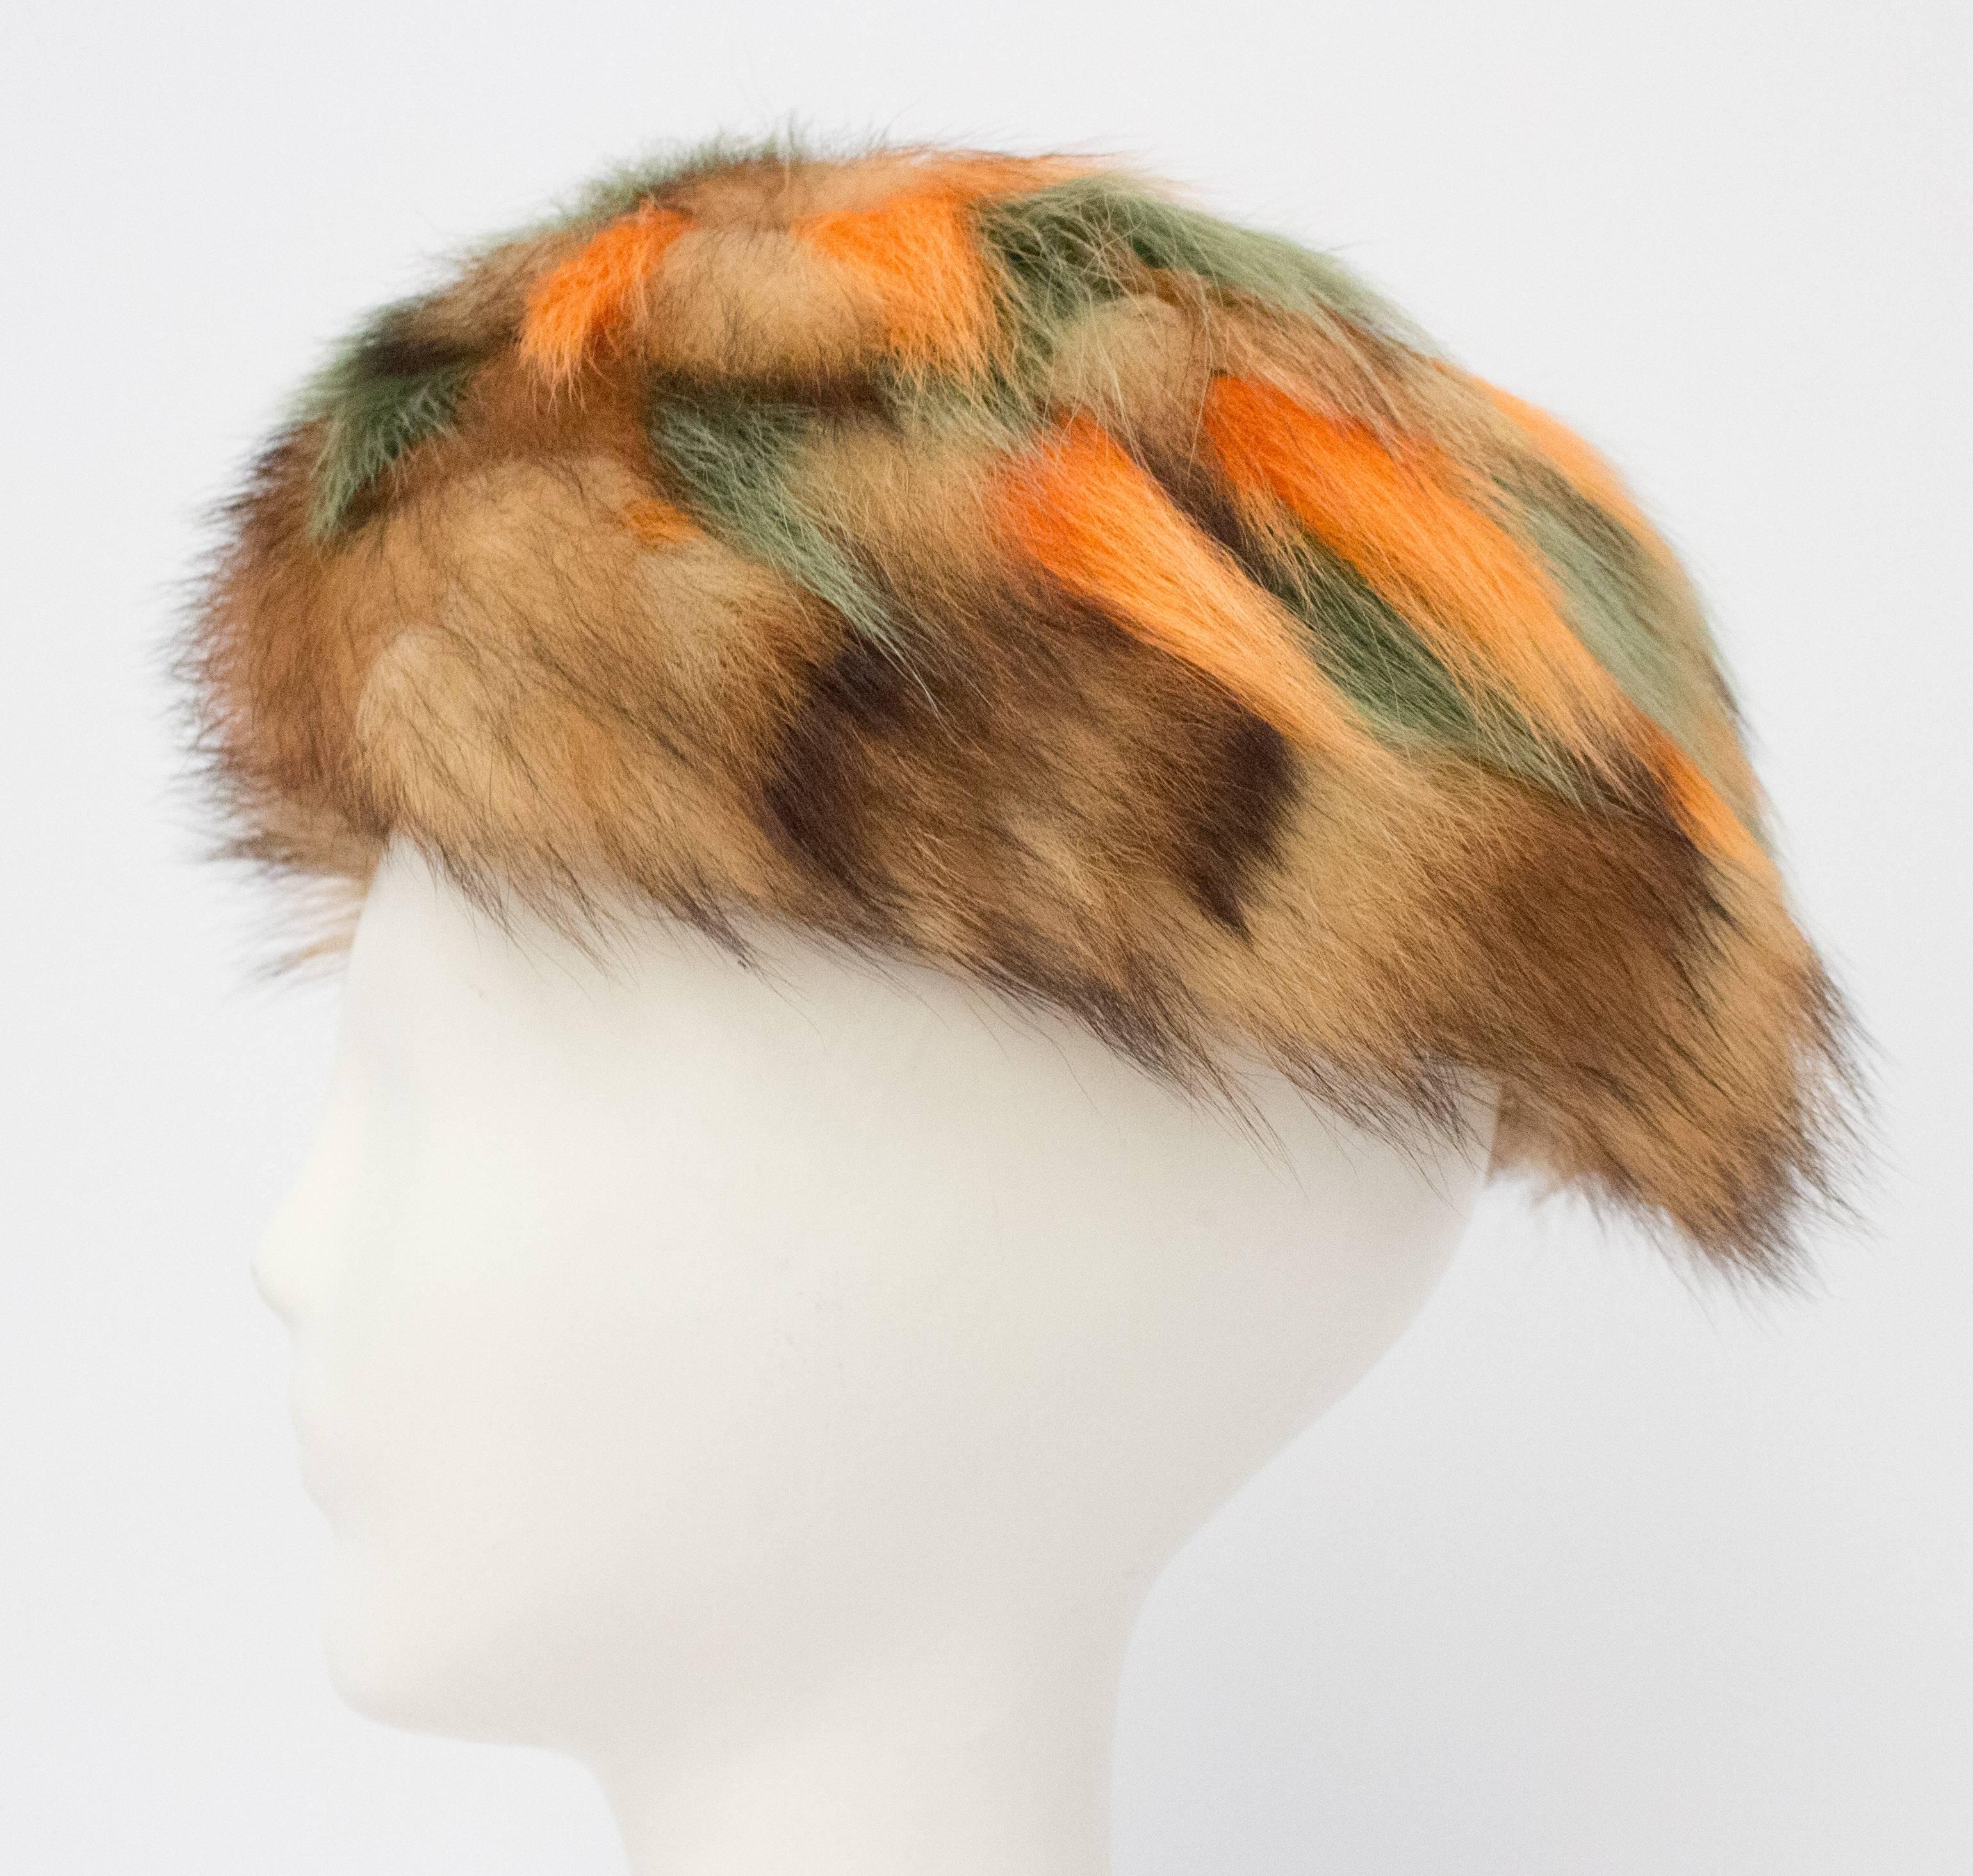 60s Multicolor Orange and Green Raccoon Fur Hat. Lined in lace, some discoloration on lining shown in photo. 

21